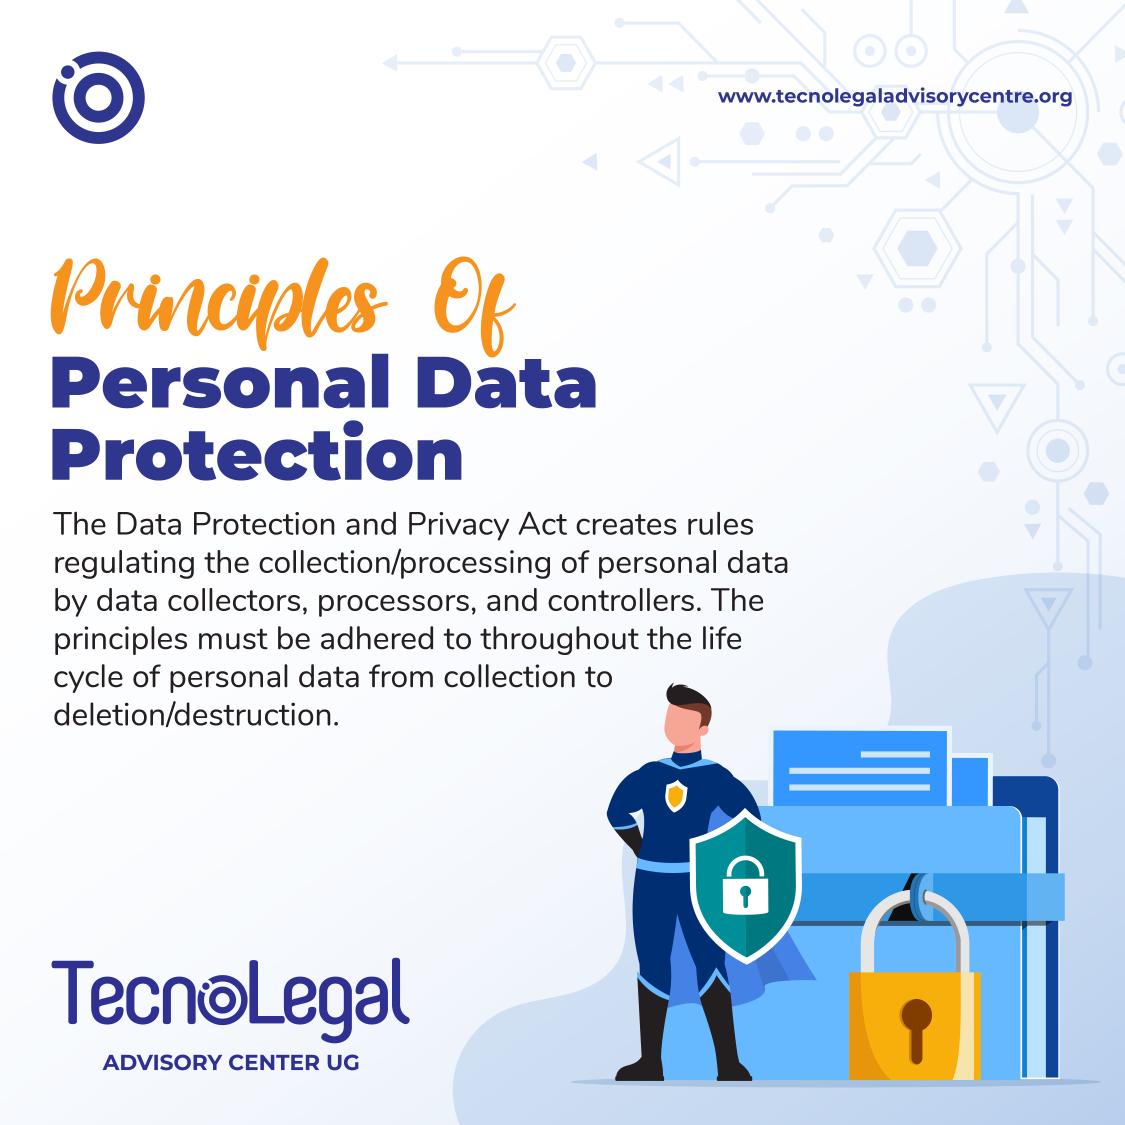 Knowledge CheckTime! .

What are the key Principles governing Data protection and Privacy? 

Let's test our knowledge 

#dataprotection
#PrivacyCompliance